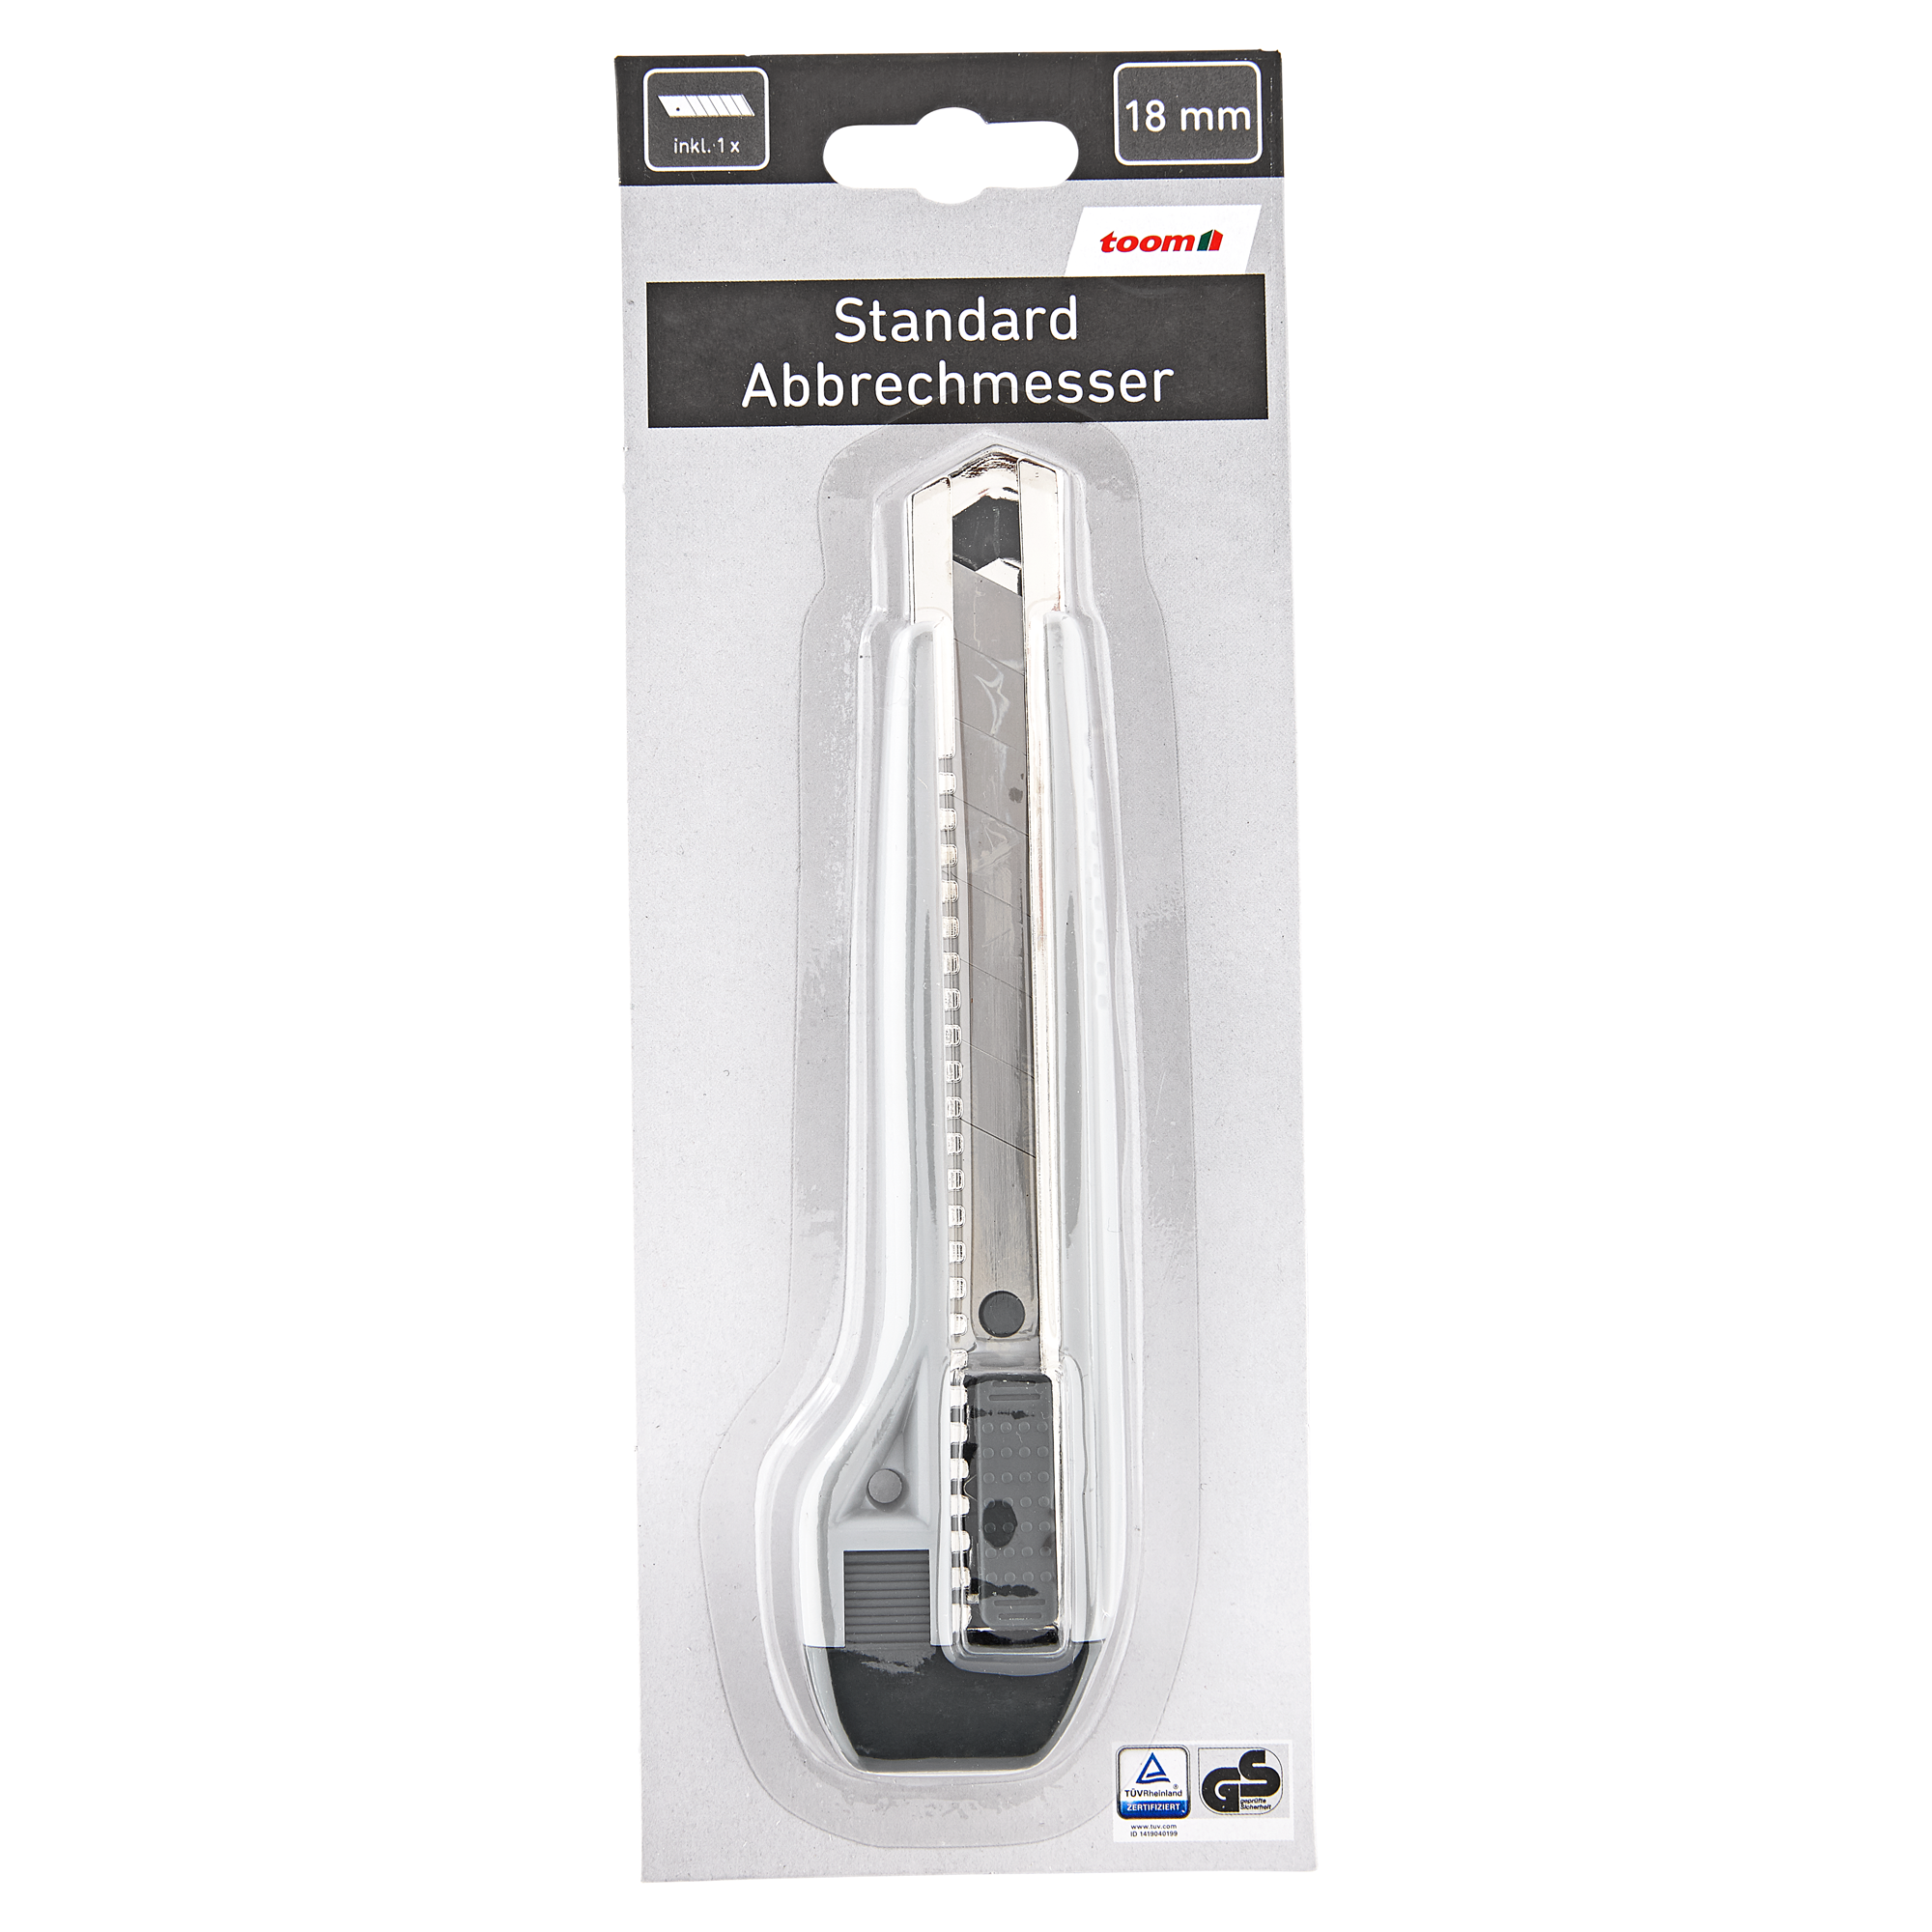 Standard Abbrechmesser 18 mm + product picture